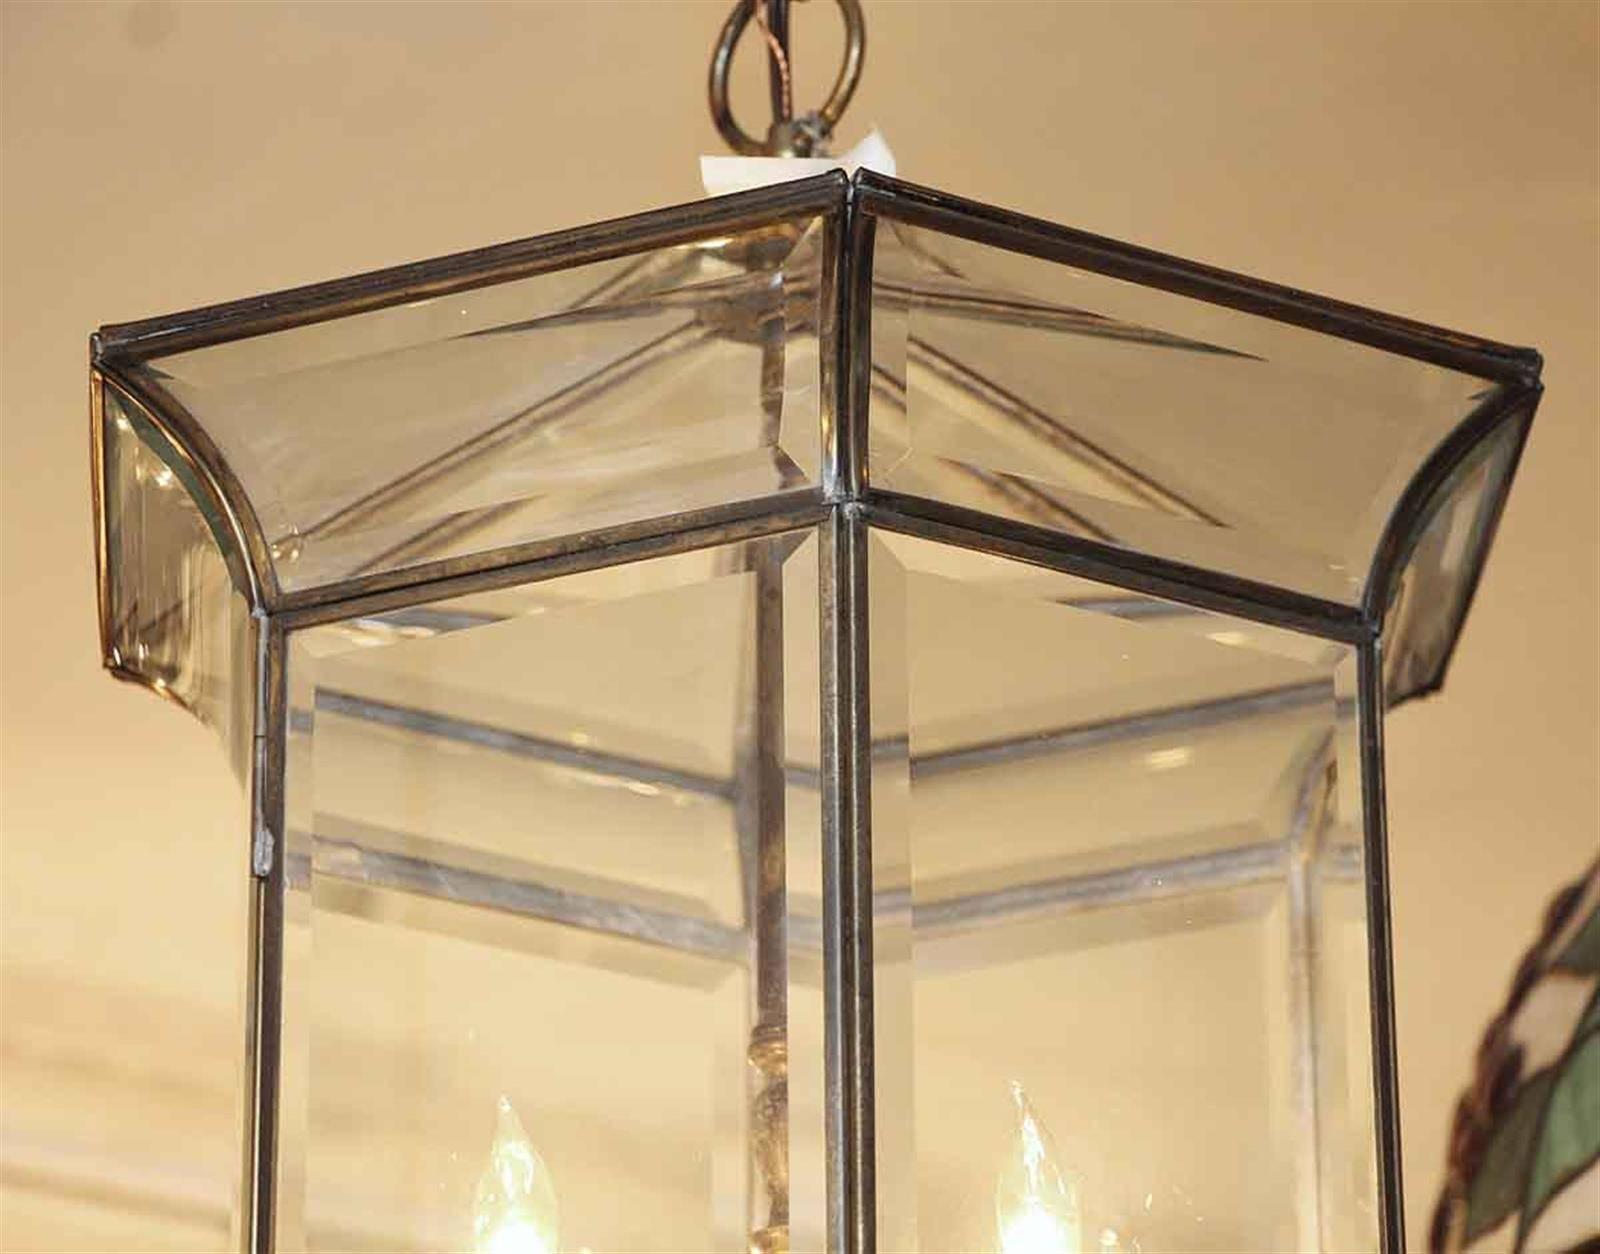 Nickel-plated lantern pendant with six beveled glass and eight lights. This can be viewed at one of our New York City locations. Please inquire for the exact address.